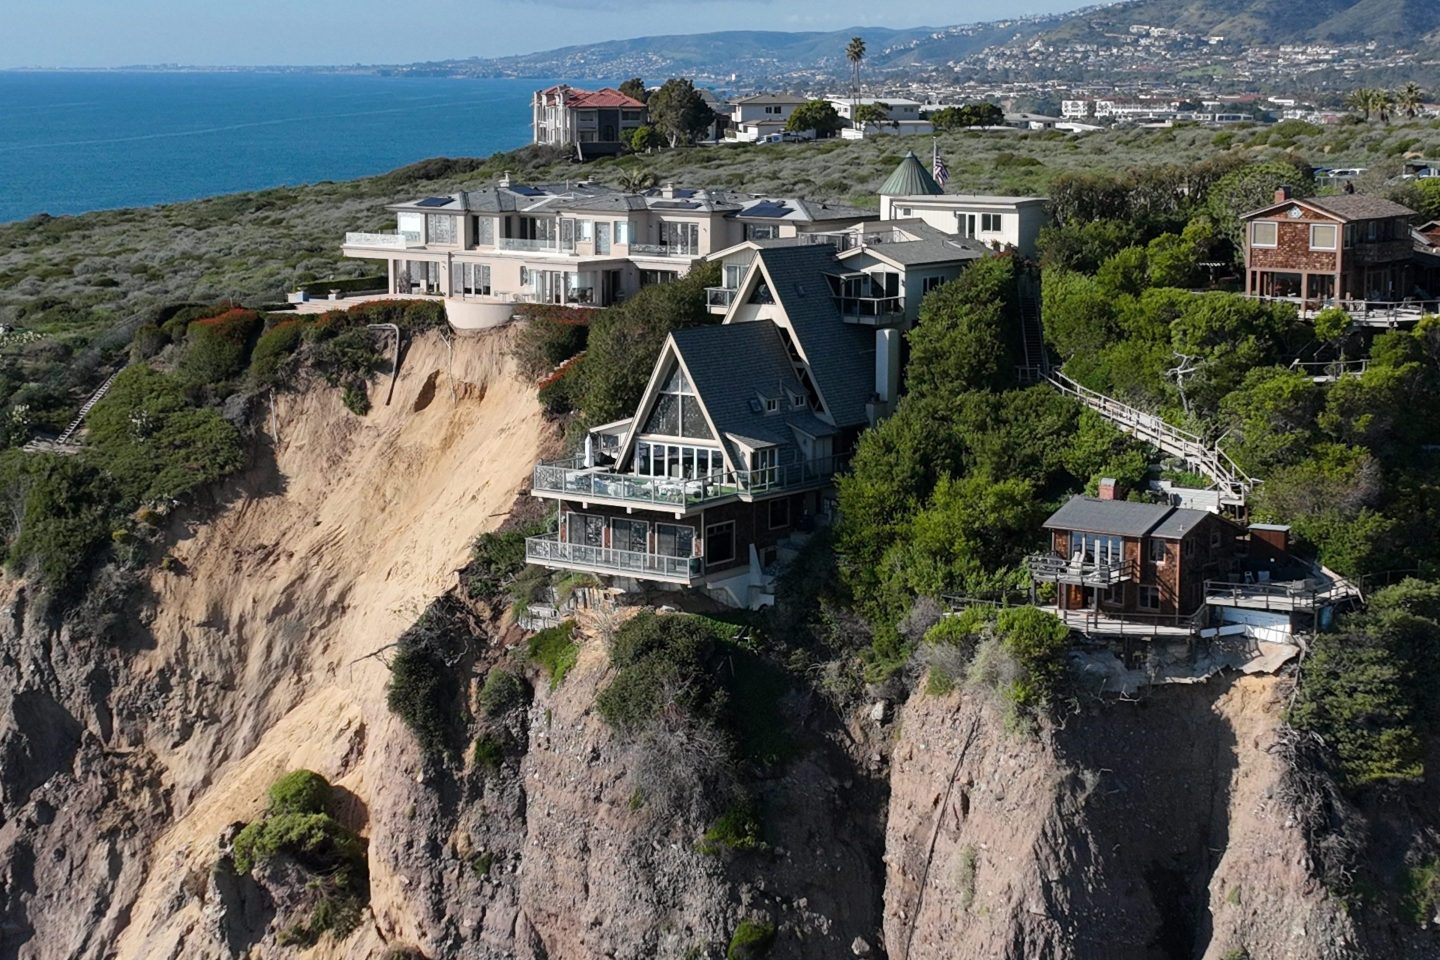 Houses overlooking a cliff in Dana Point, California, where houses recently fell victim to landslides